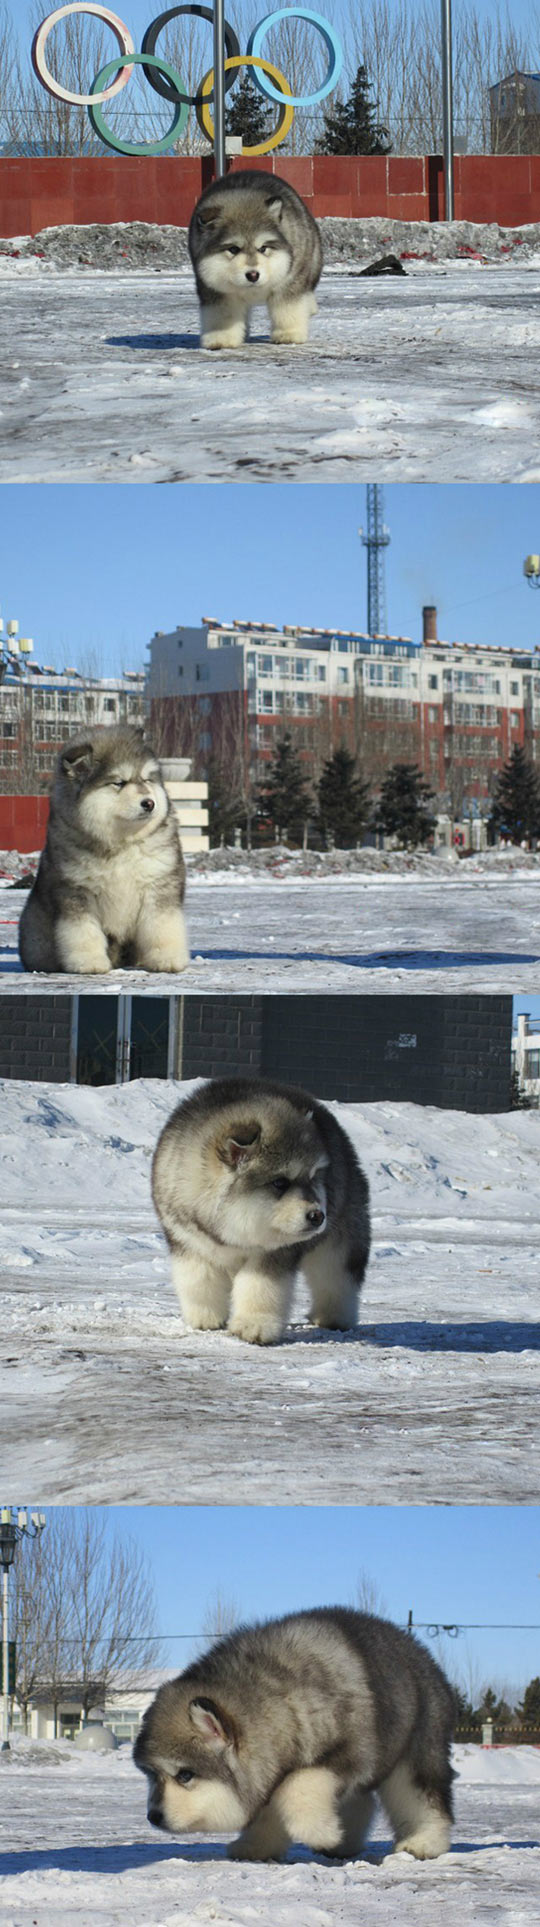 So This Dog Exists And He’s Ridiculously Fluffy